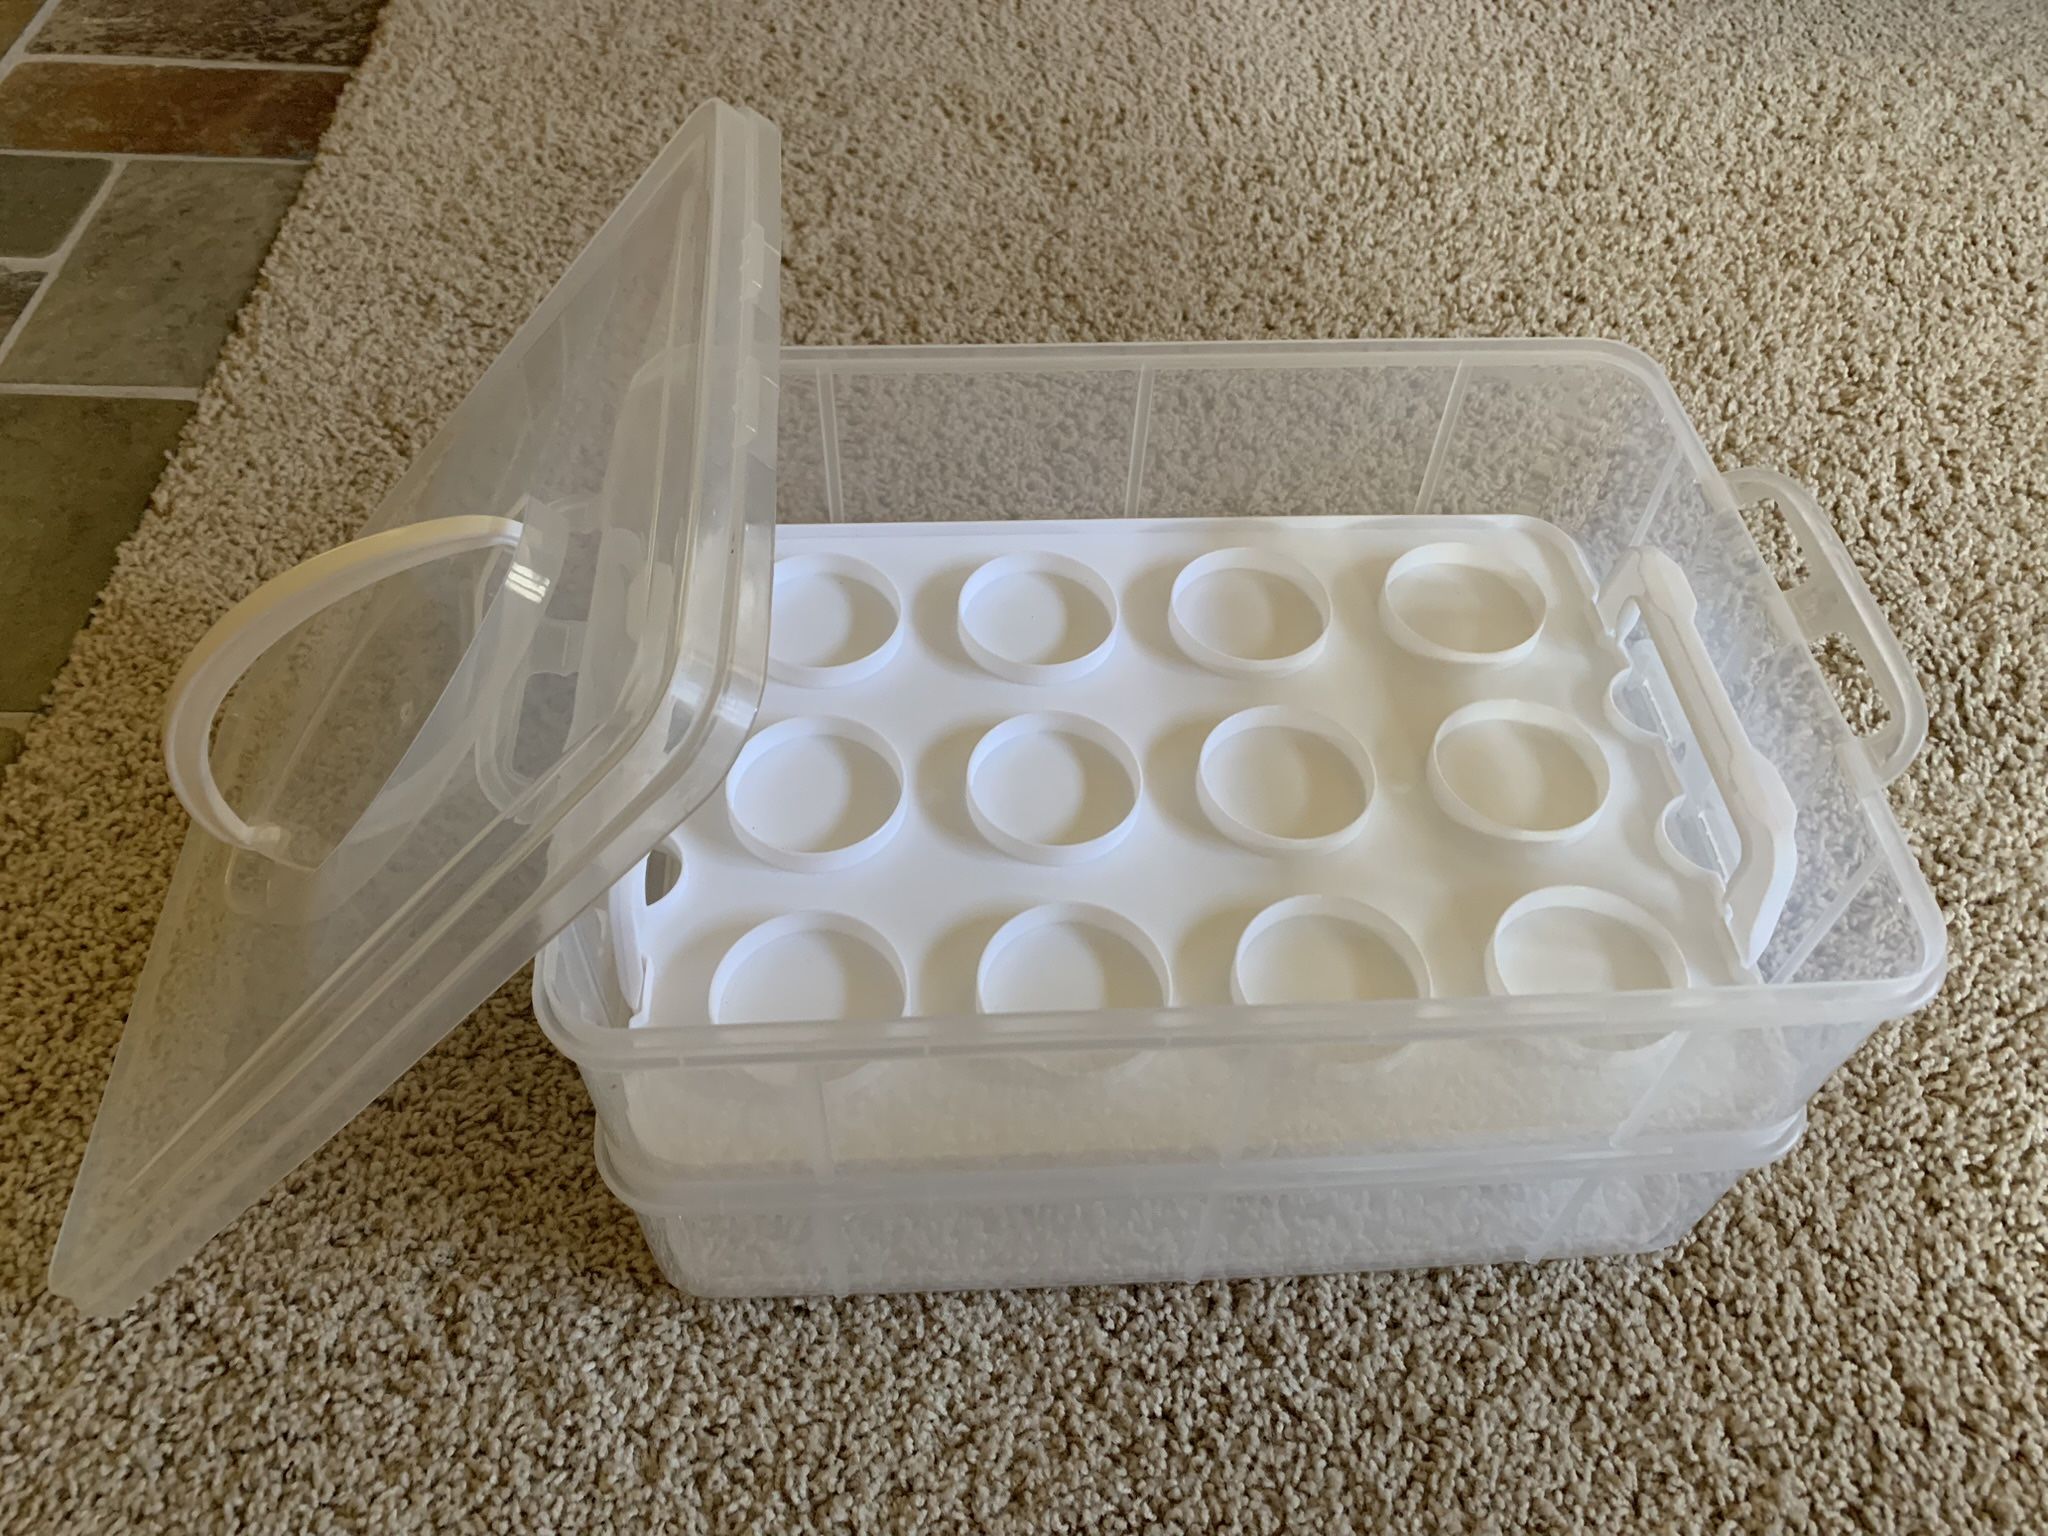 Cupcake Muffin Travel Container Snapware NEW 2 Tier - Holds 12 Or 24